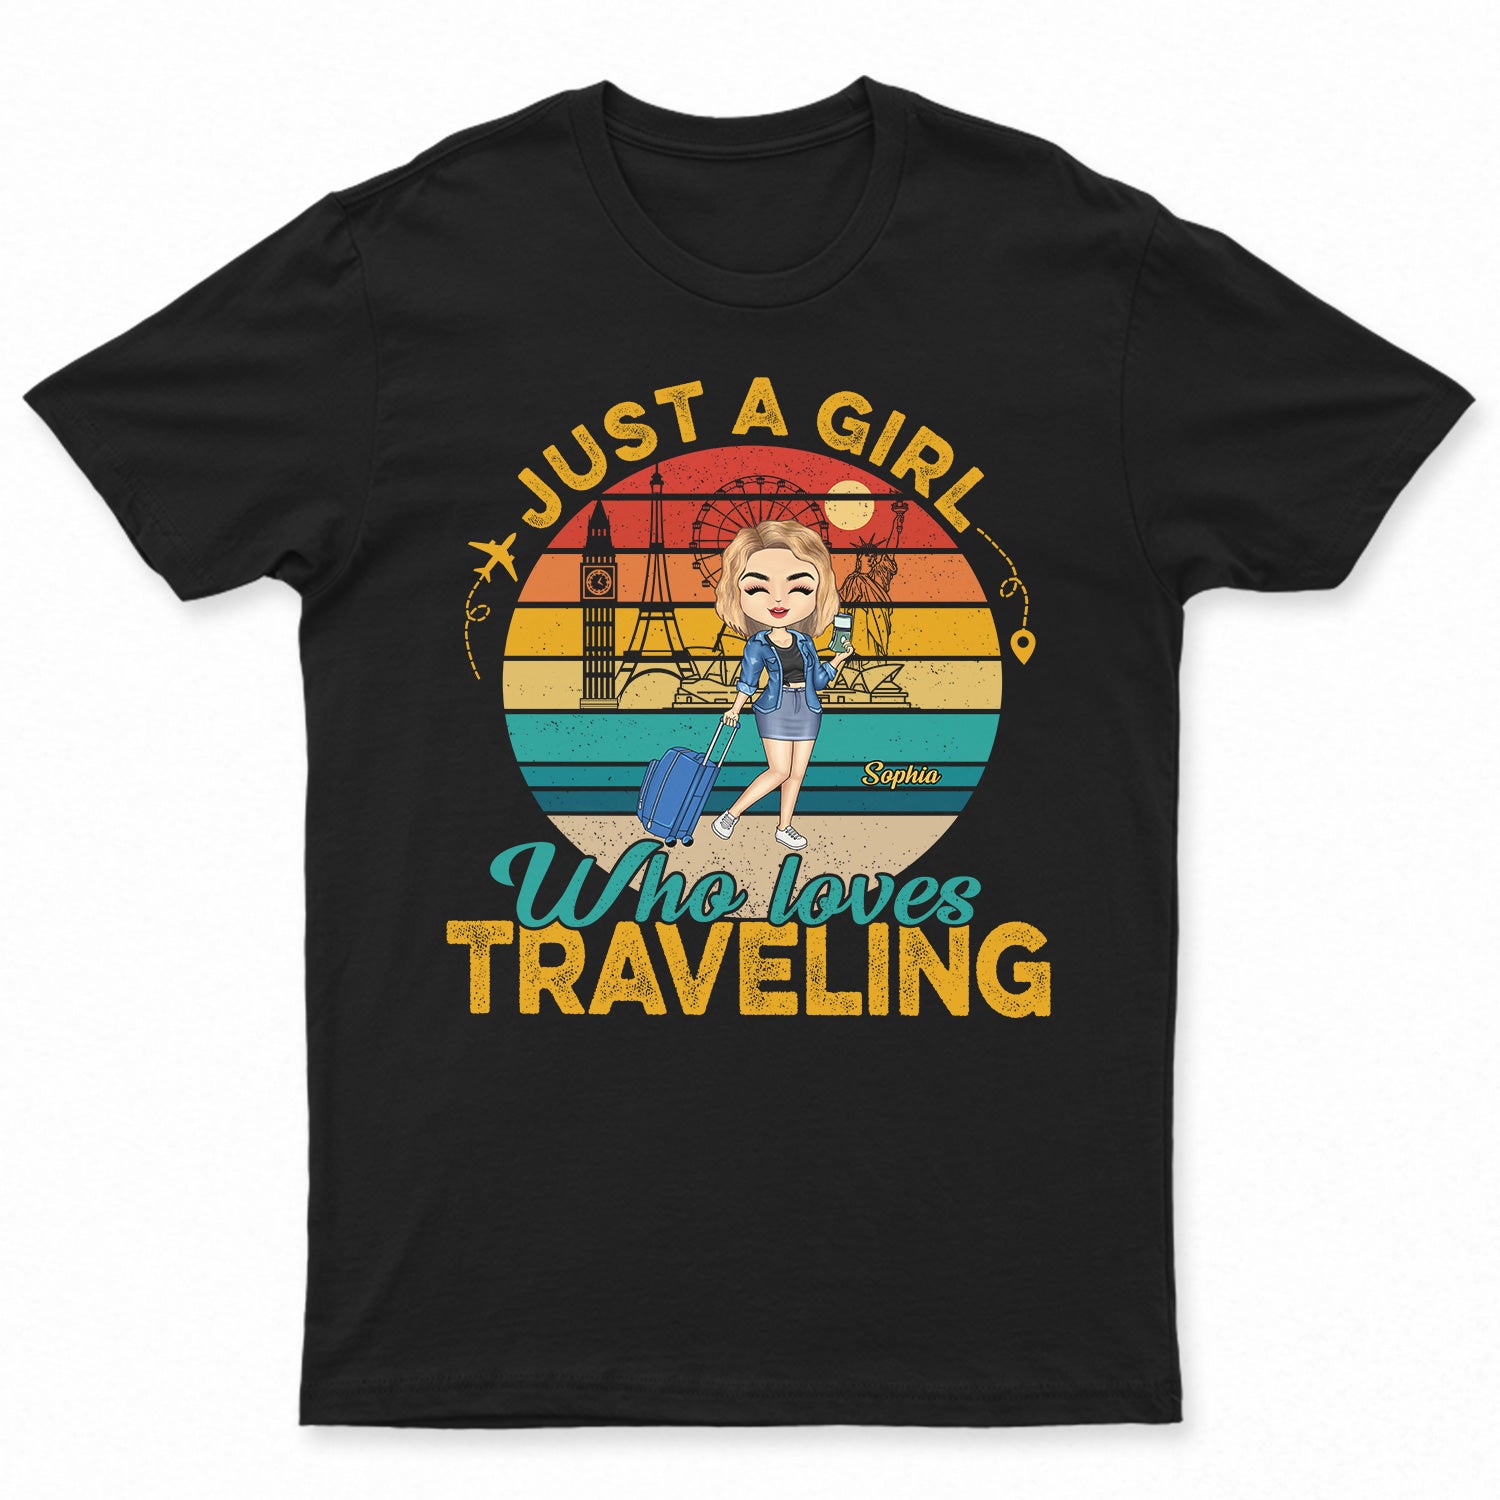 Just A Girl Boy Who Loves Traveling Cruising - Birthday Gift For Him, Her, Trippin‘, Travel Lovers - Personalized Custom T Shirt